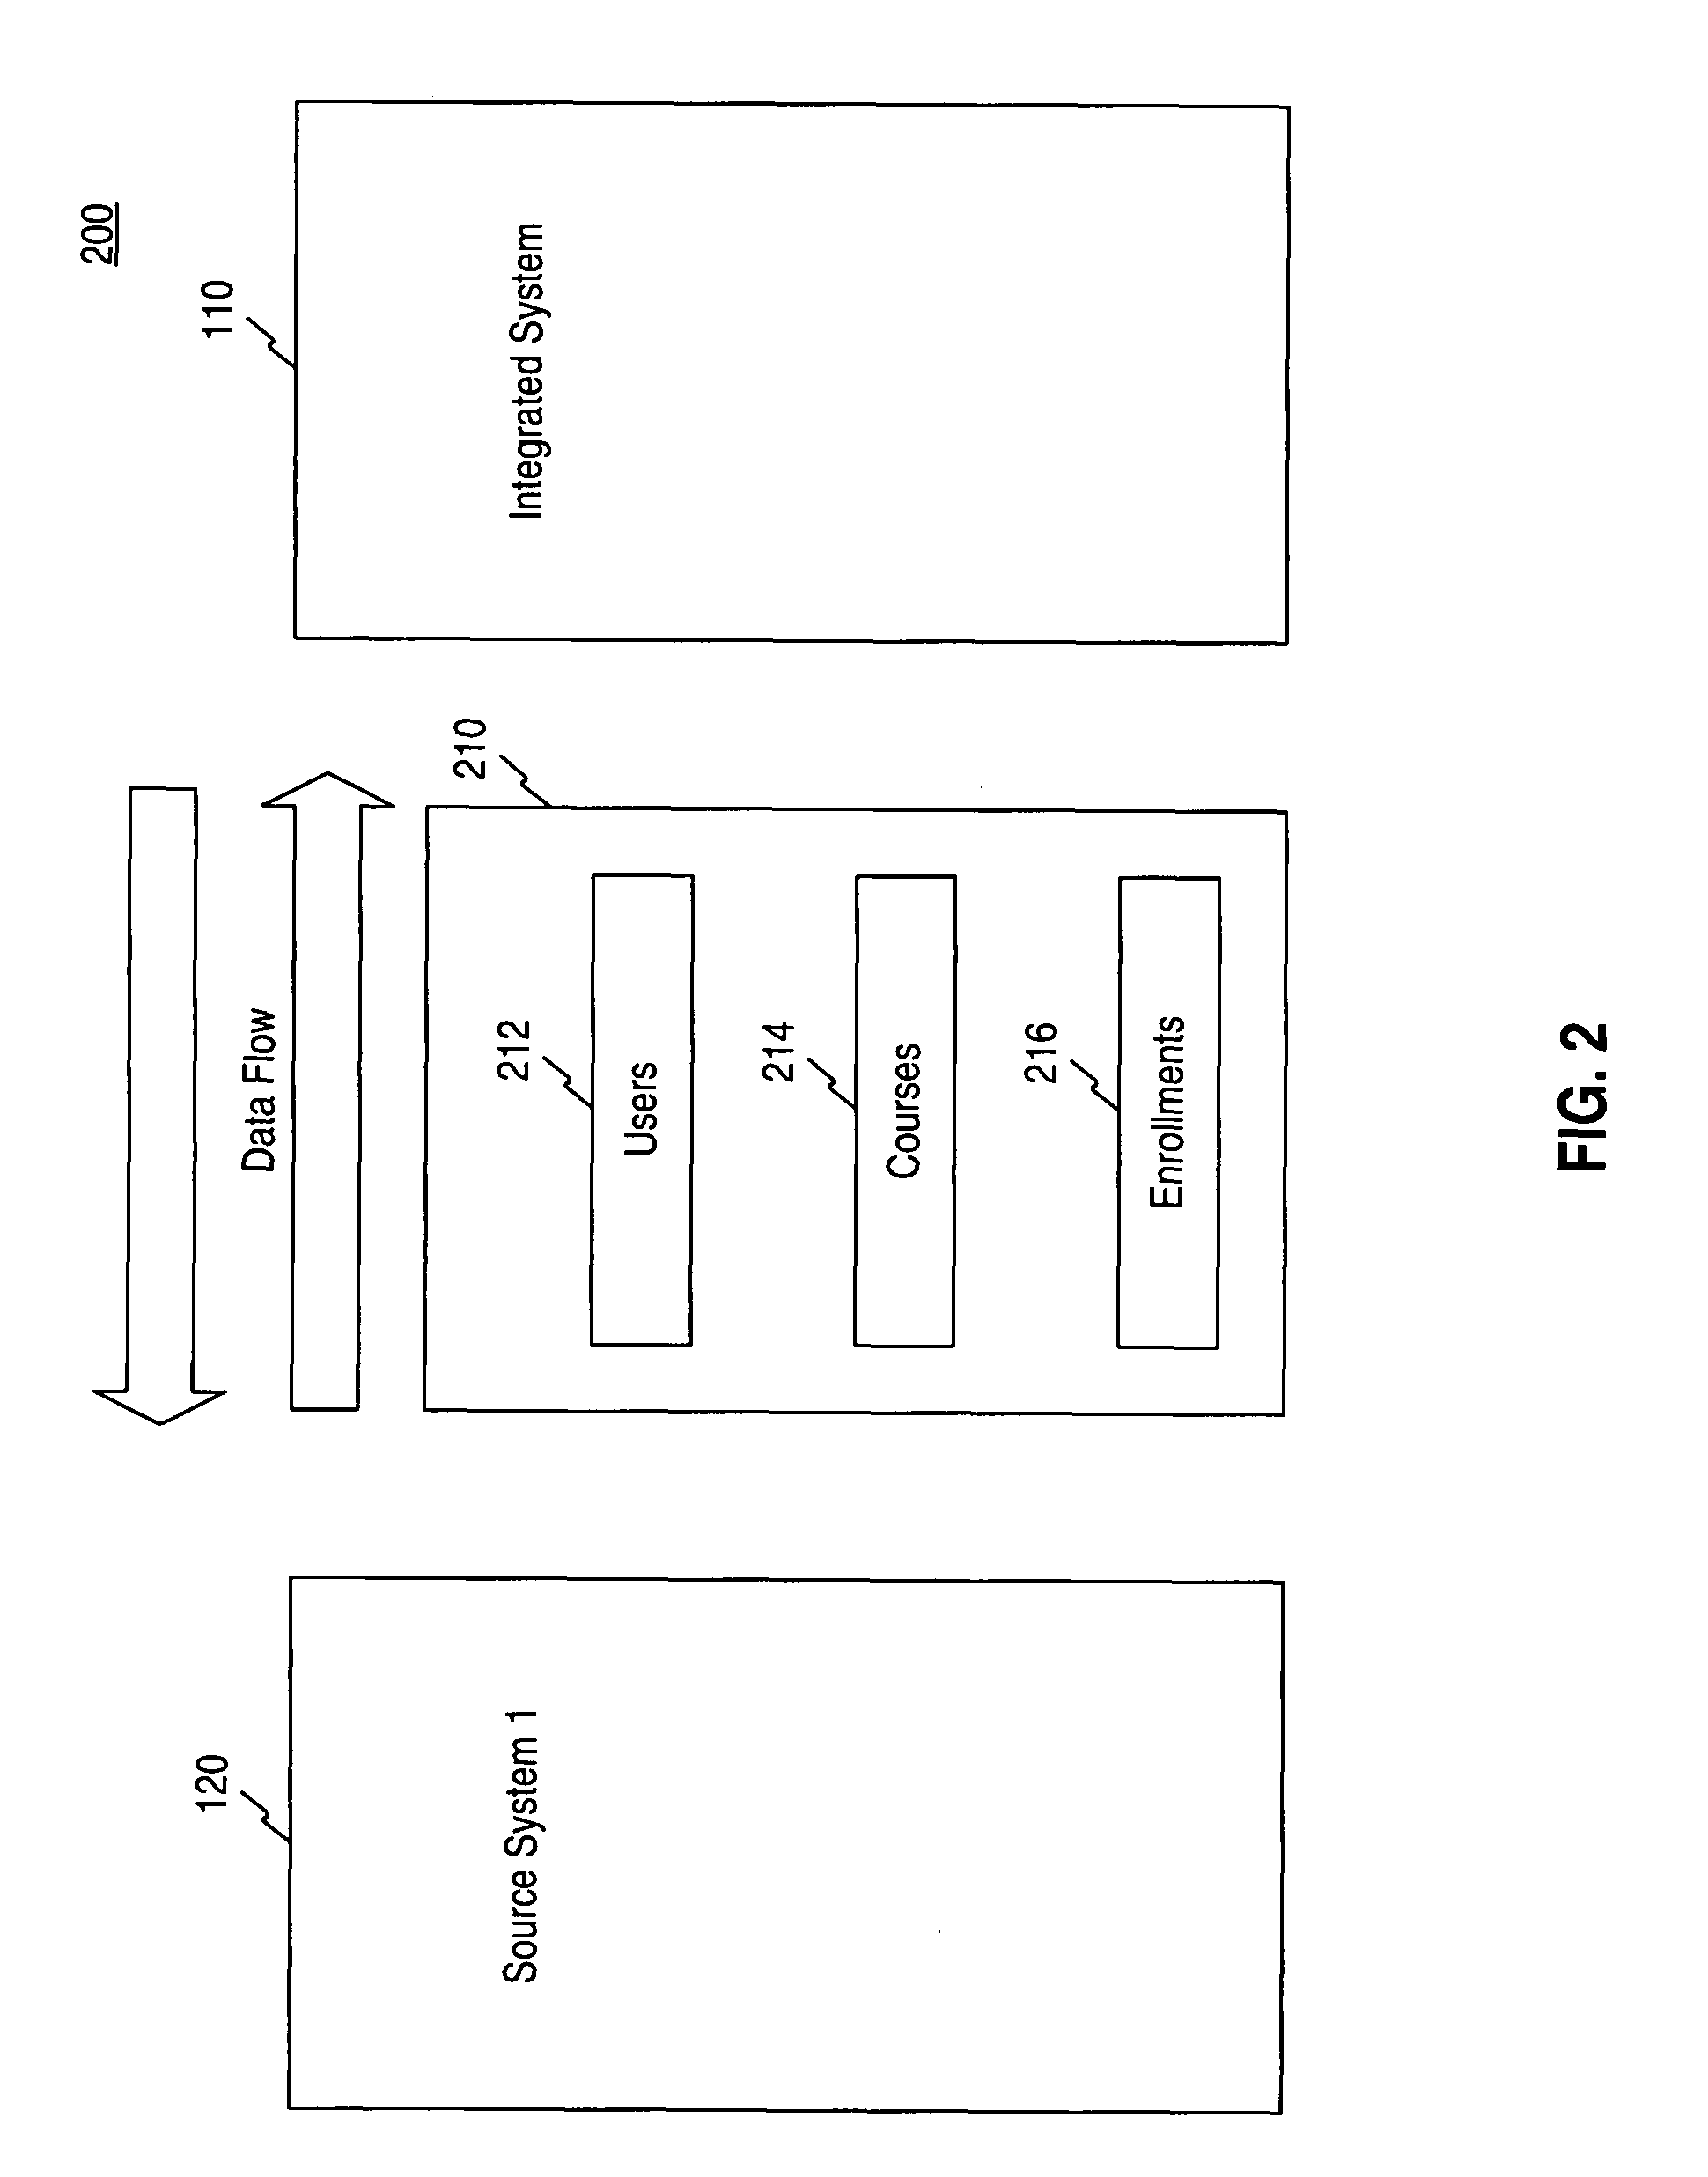 Systems and methods for integrating educational software systems